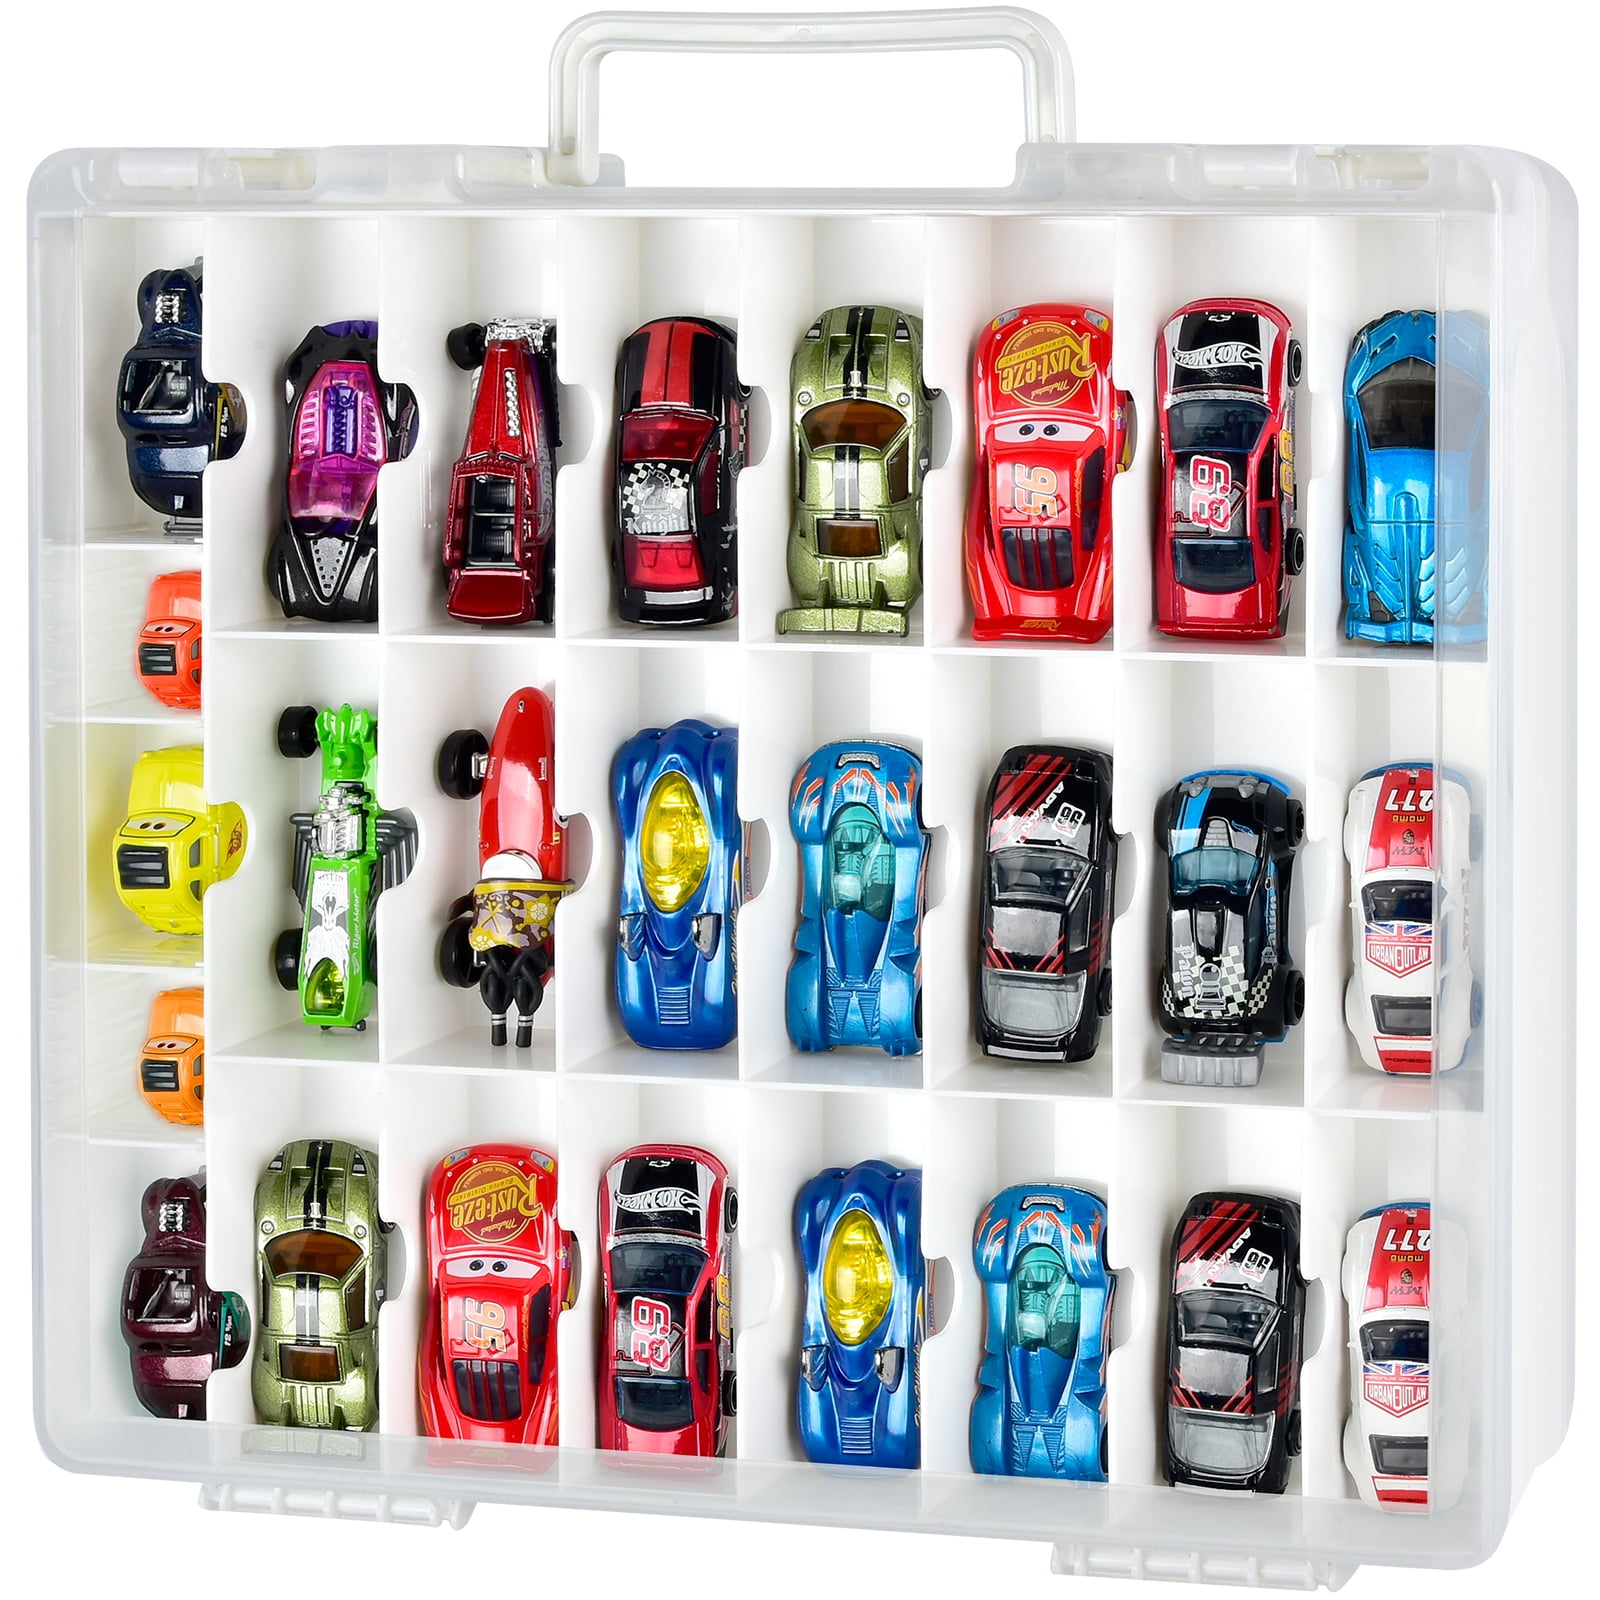 Hot Wheels Cases and Bags for carrying toy cars